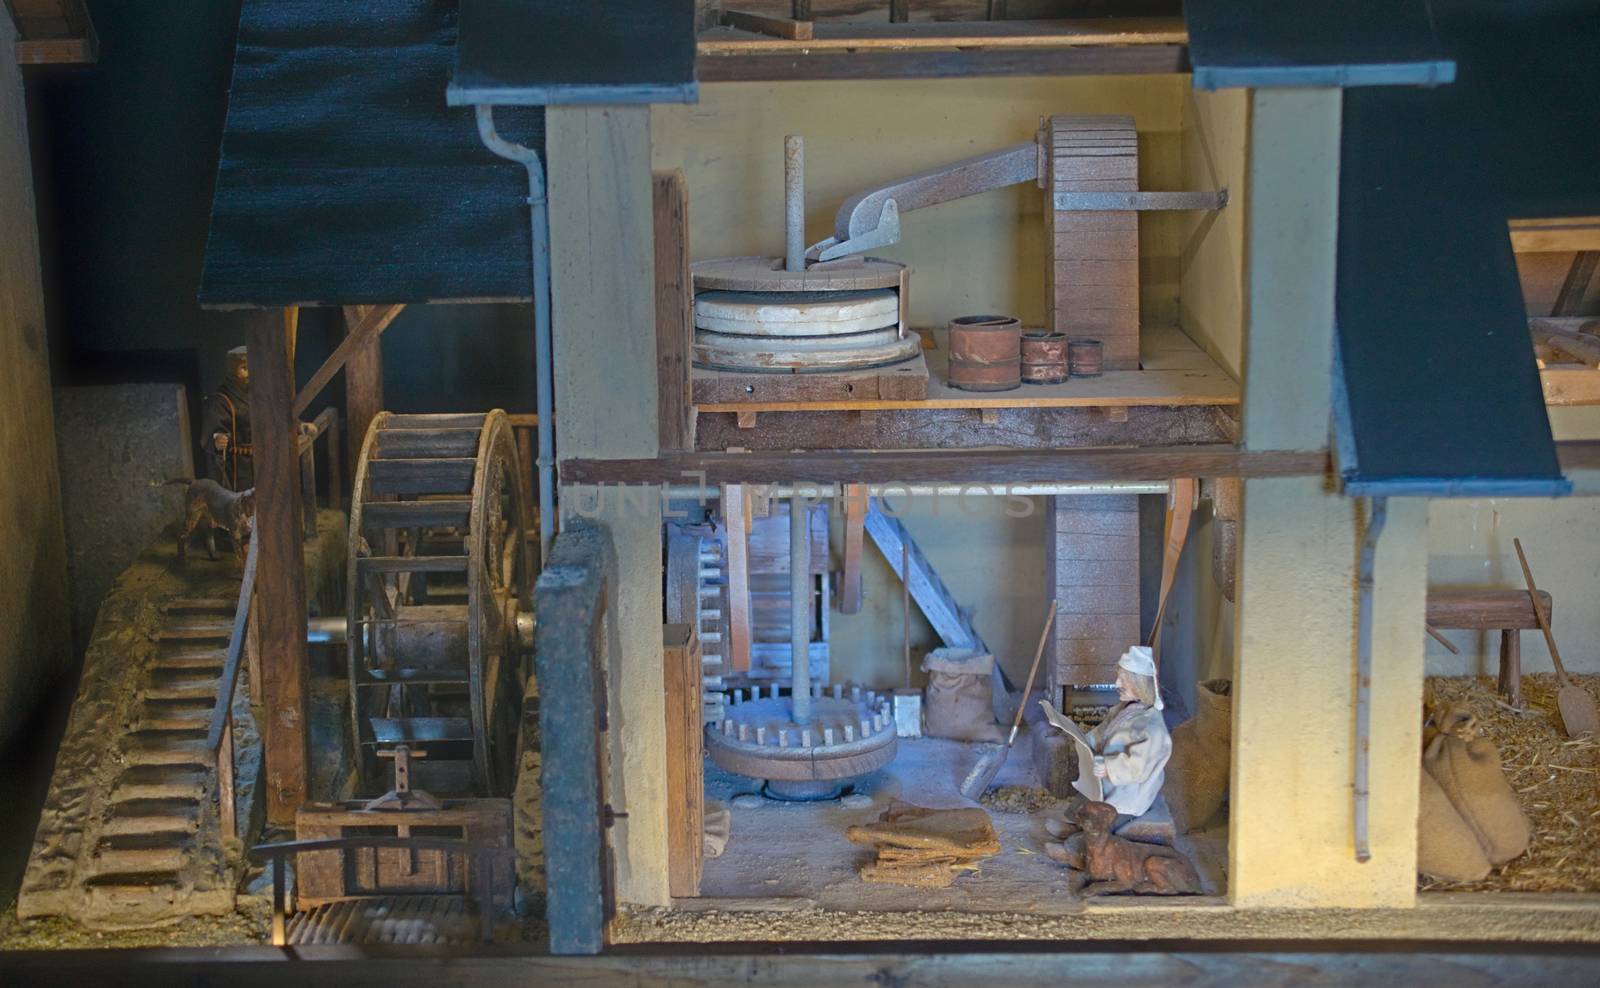 Small scale representation of a work in an old mill